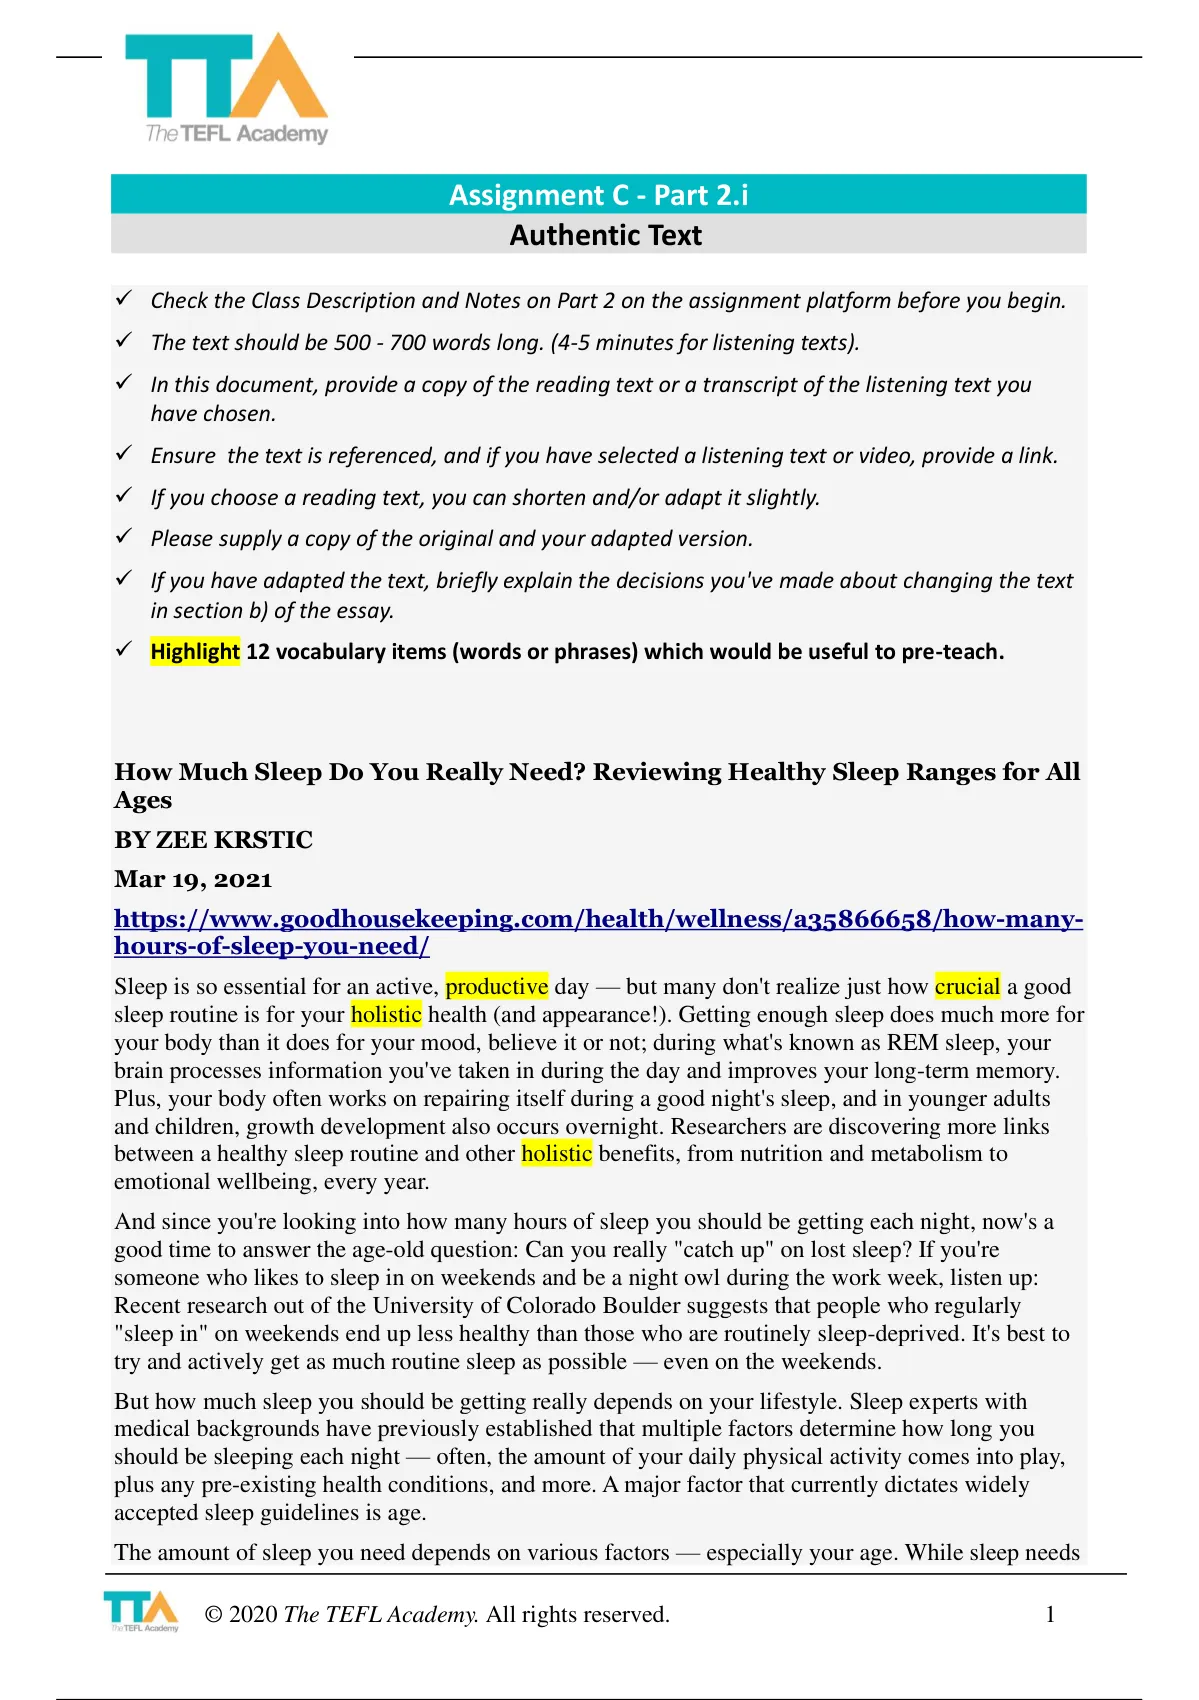 tefl academy assignment c authentic text